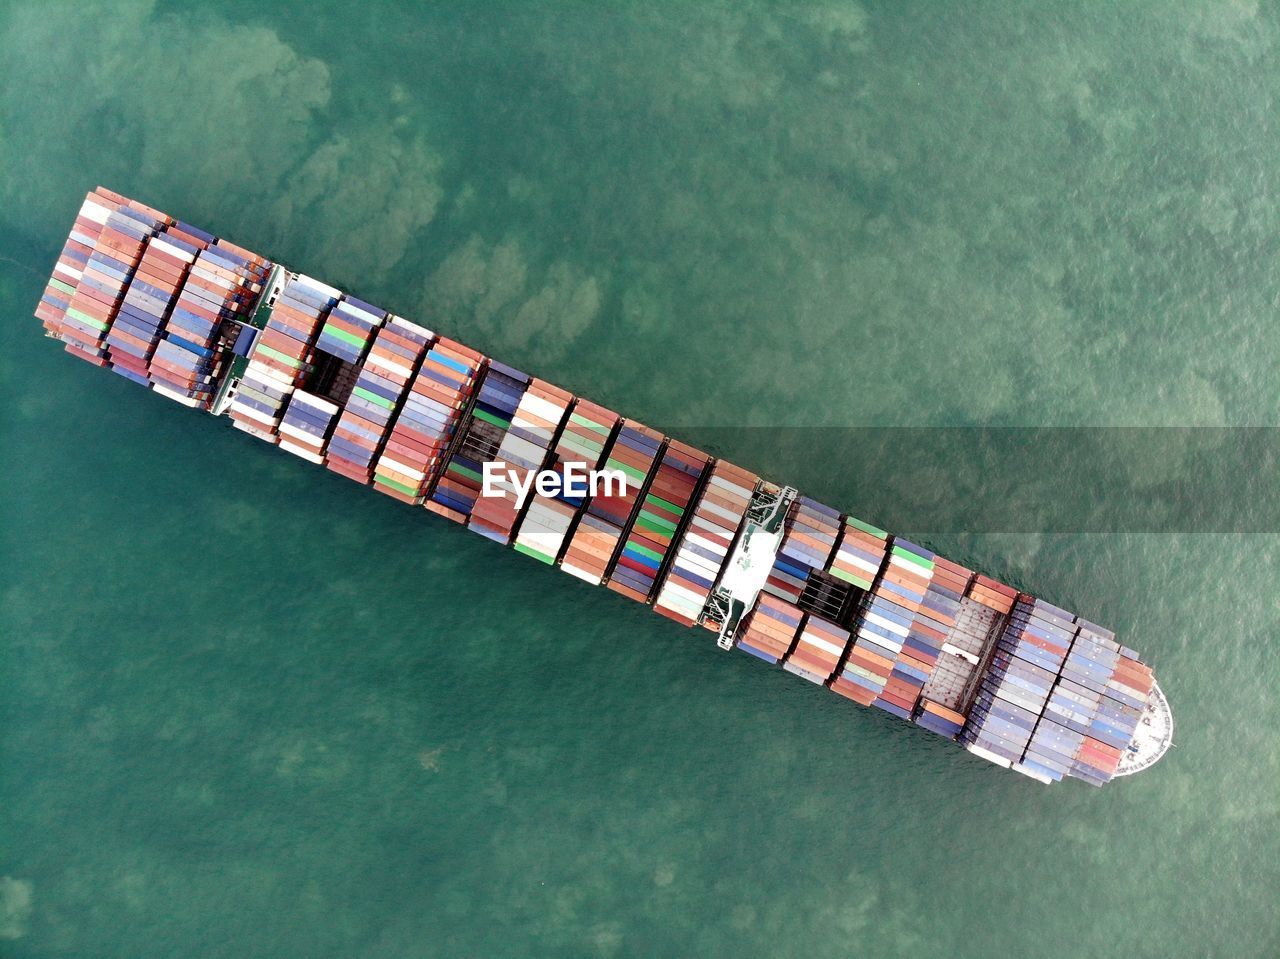 World biggest containership from above. anchored in singapore strait.